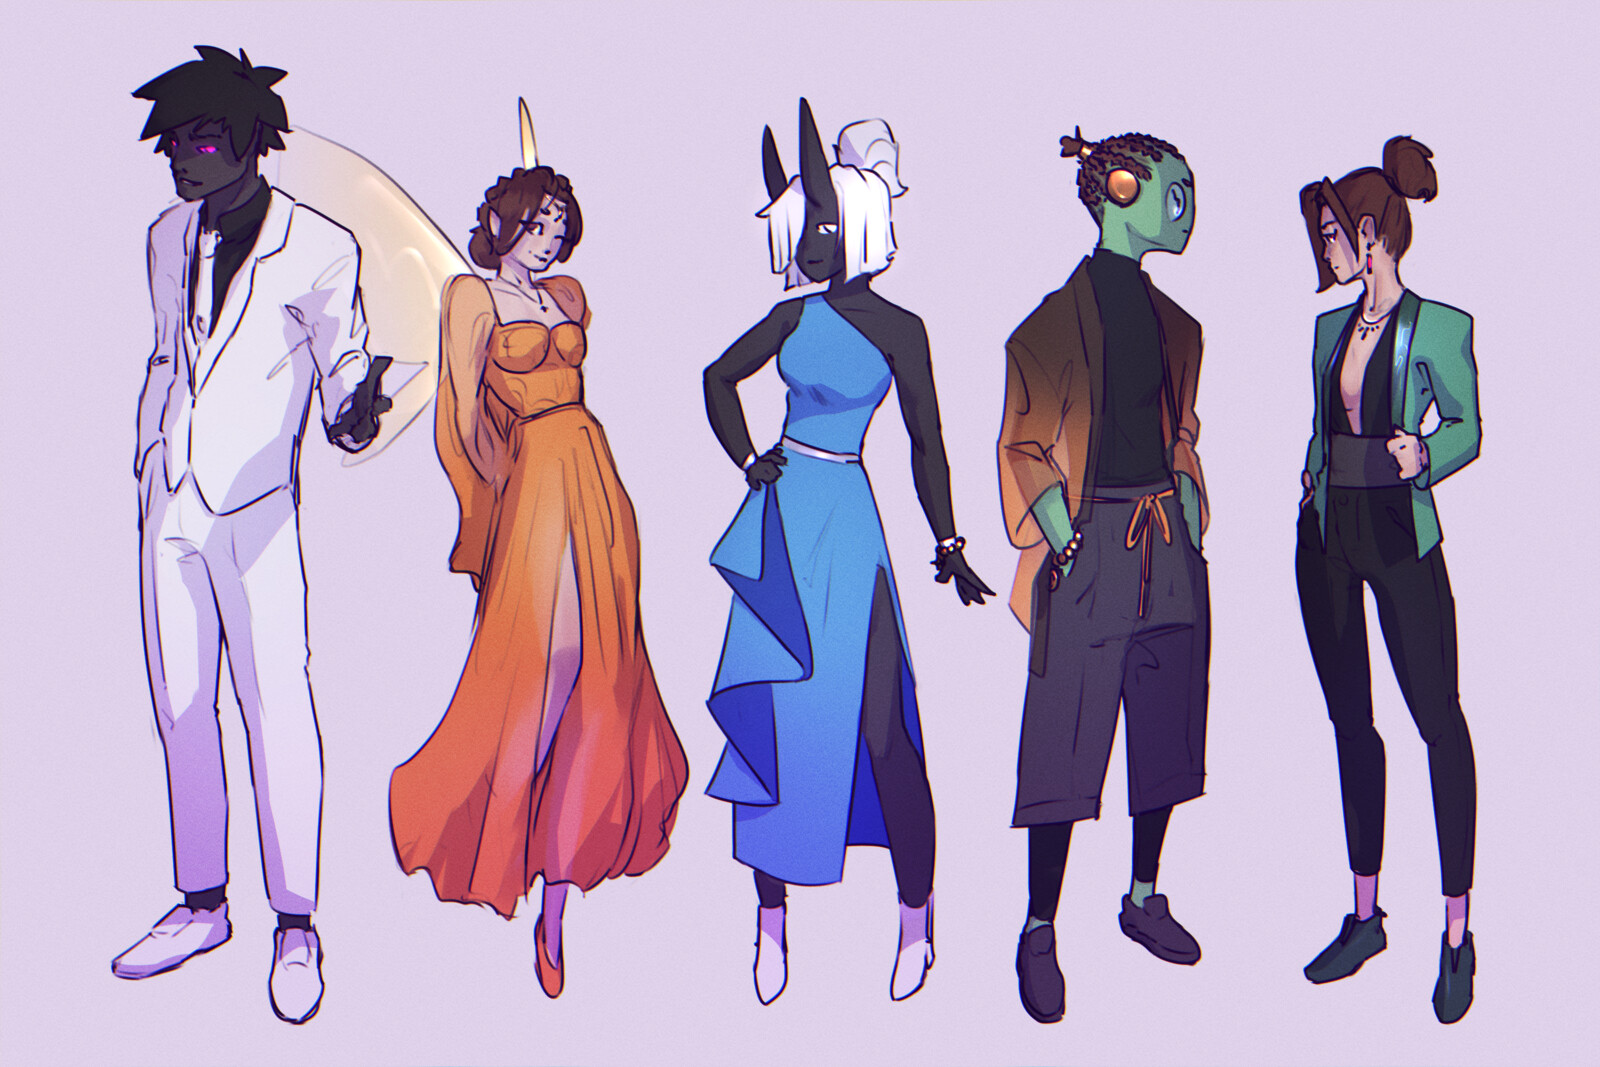 Gala designs for some of my friend's and my character.
From left to right, og characters belong to @SupremesamaBH @brainslime_ @V1Katniss then me and @eulatiuu respectively